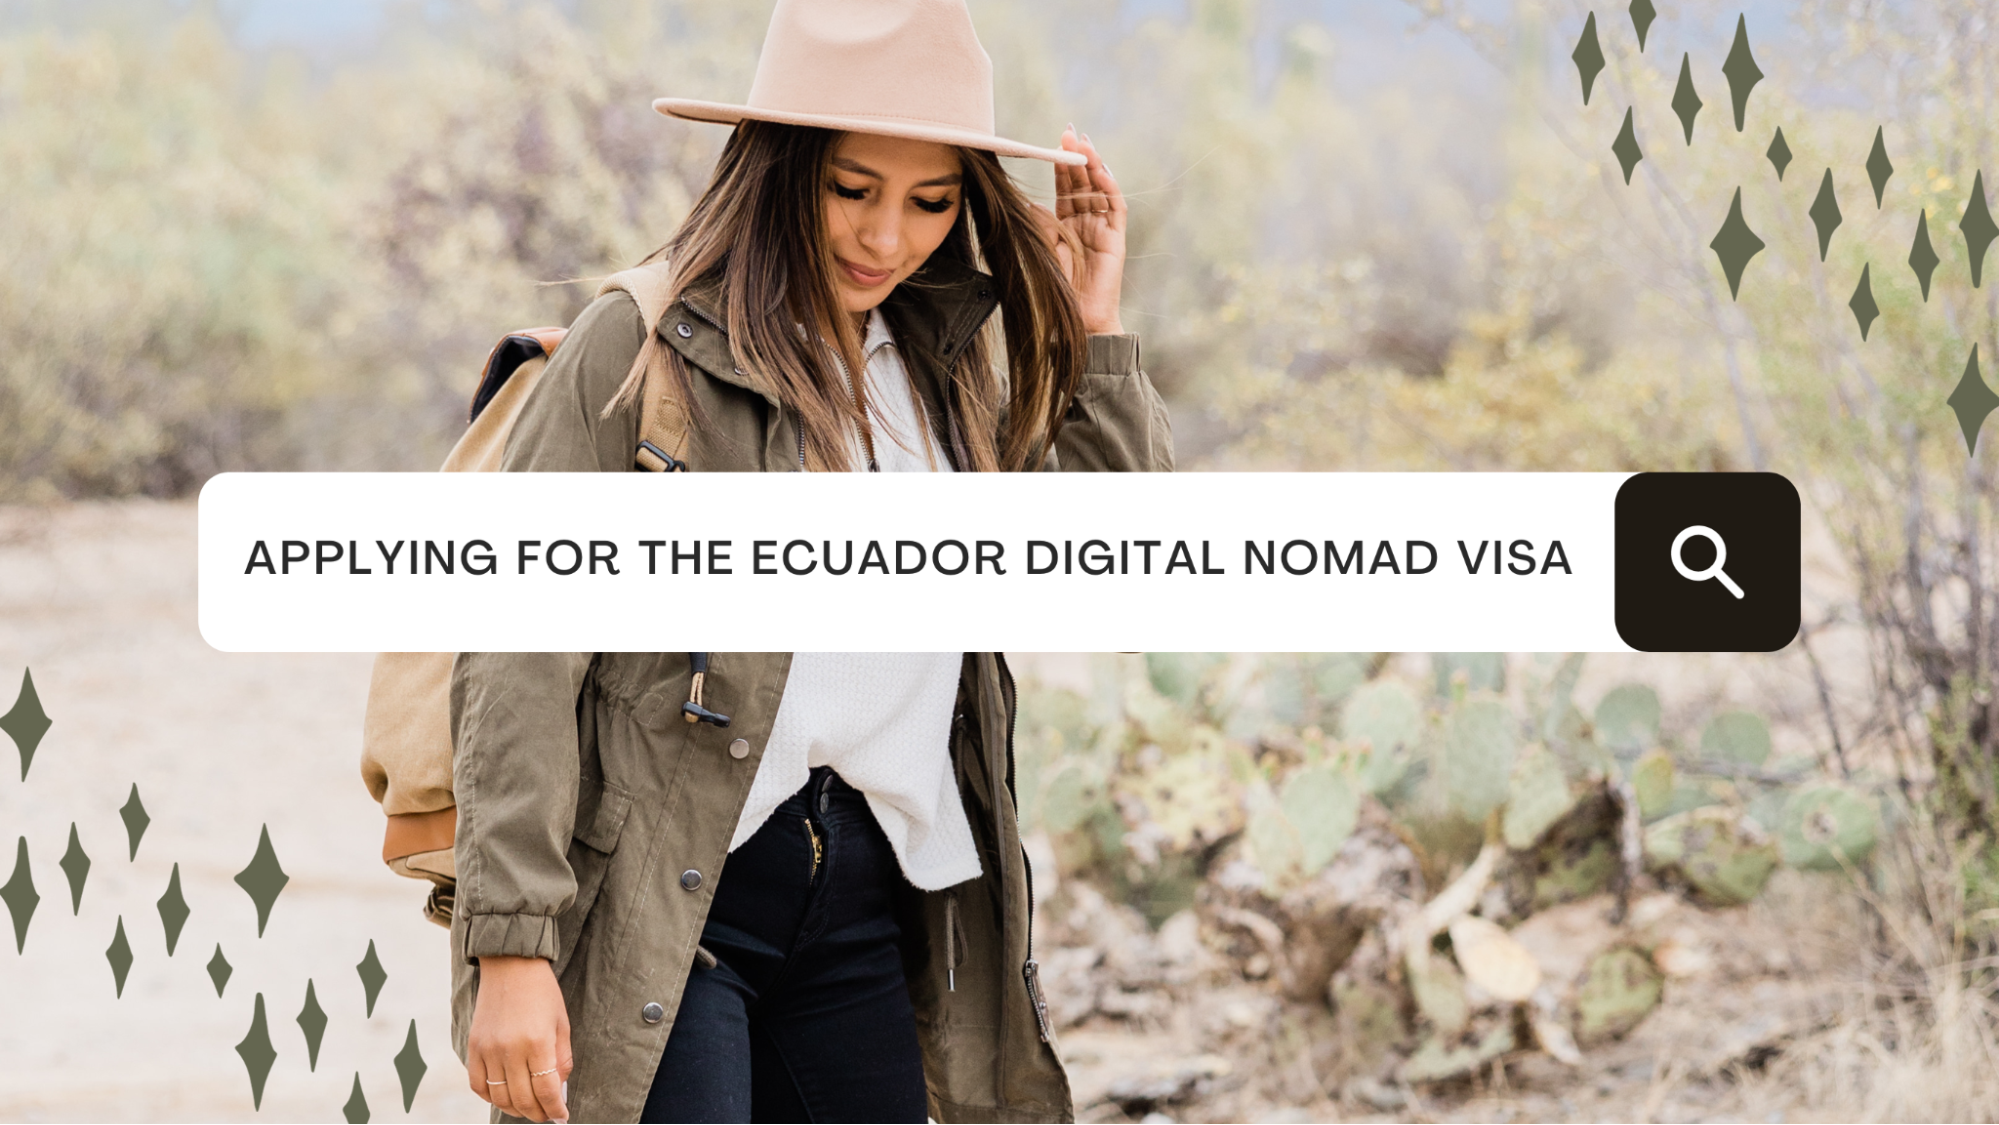 Step-by-Step Guide to Applying for the Ecuador Digital Nomad Visa